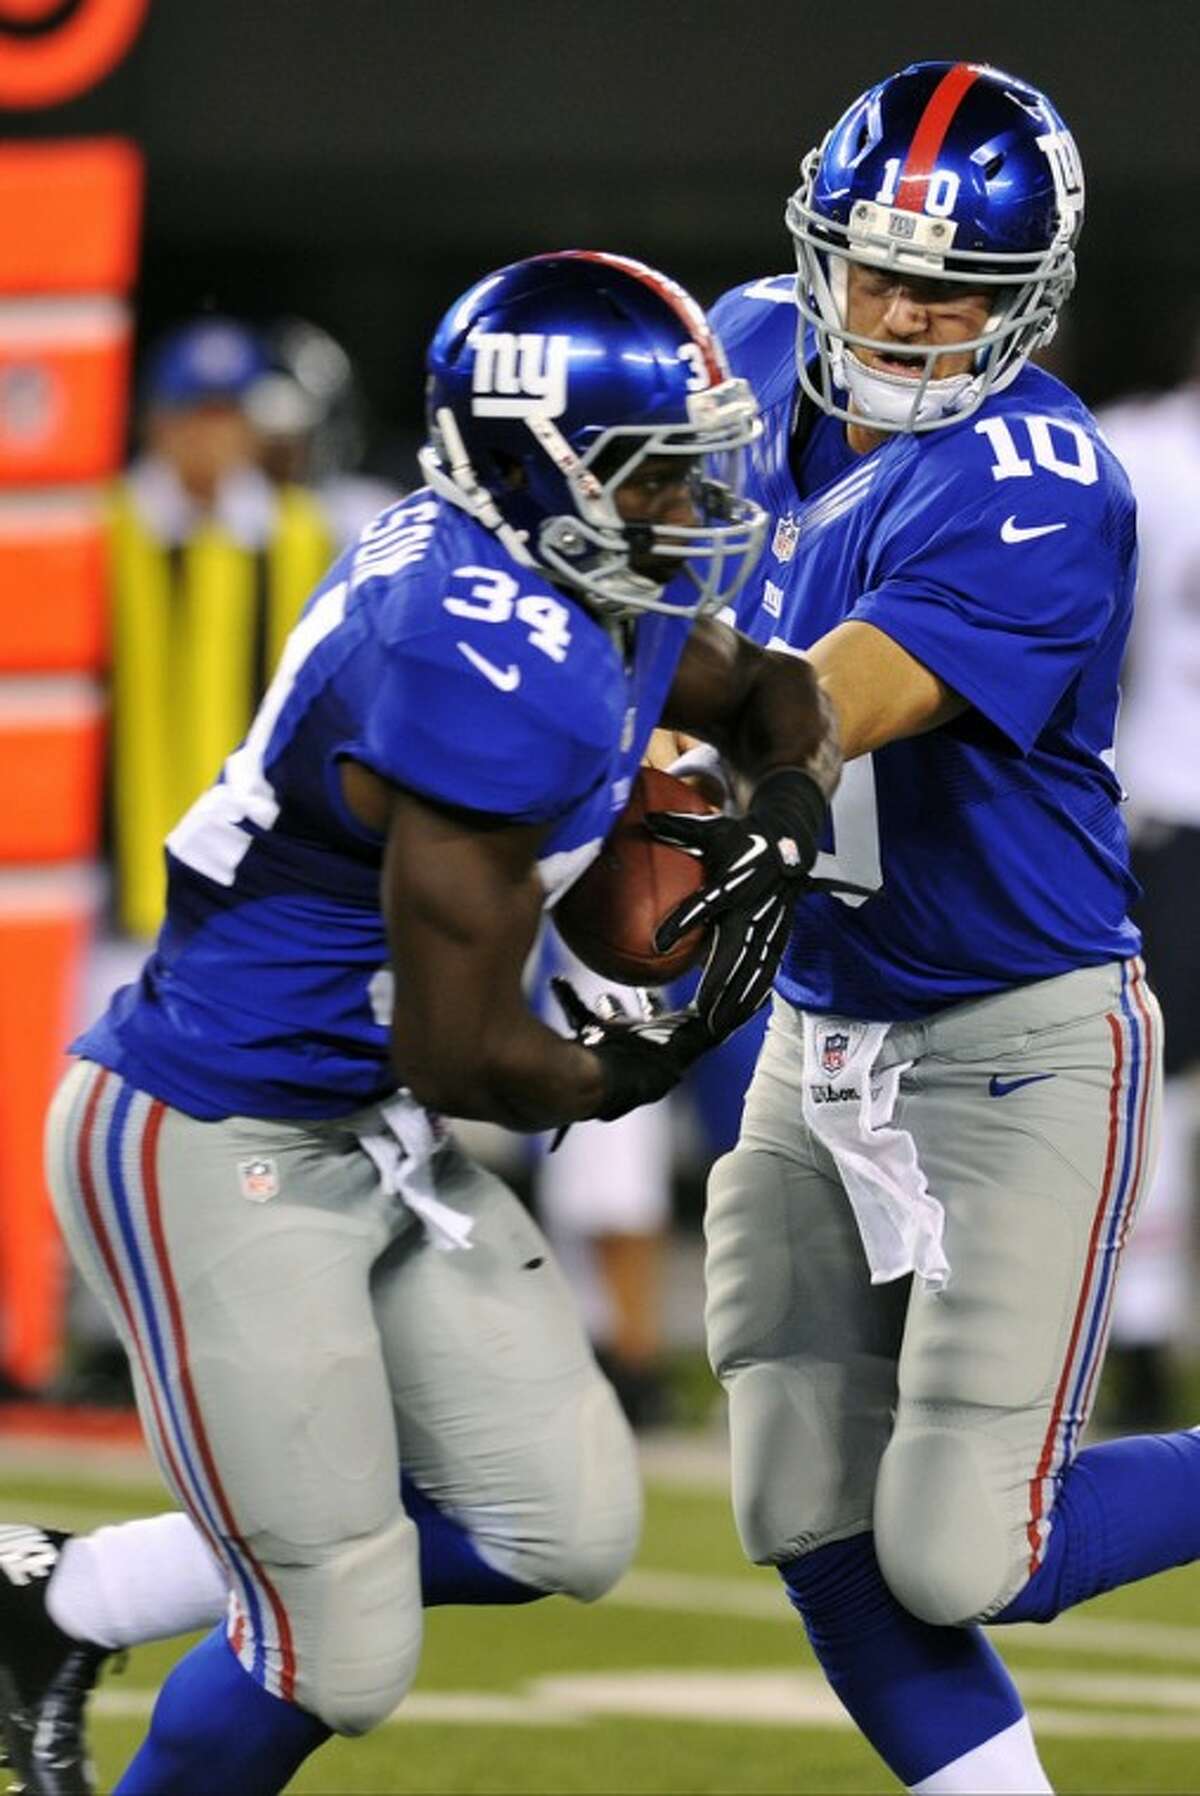 FILE - In this Aug. 24, 2012, file photo, New York Giants quarterback Eli Manning (10) hands the ball to running back David Wilson (34) during the first half of an NFL preseason football game against the Chicago Bears in East Rutherford, N.J. The running game, which was the worst in the NFL in 2011, has a chance to run over people if first-round draft choice Wilson lives up to the hype. The Giants are scheduled to begin their season on Sept. 5 at home against the Dallas Cowboys. (AP Photo/Bill Kostroun, File)